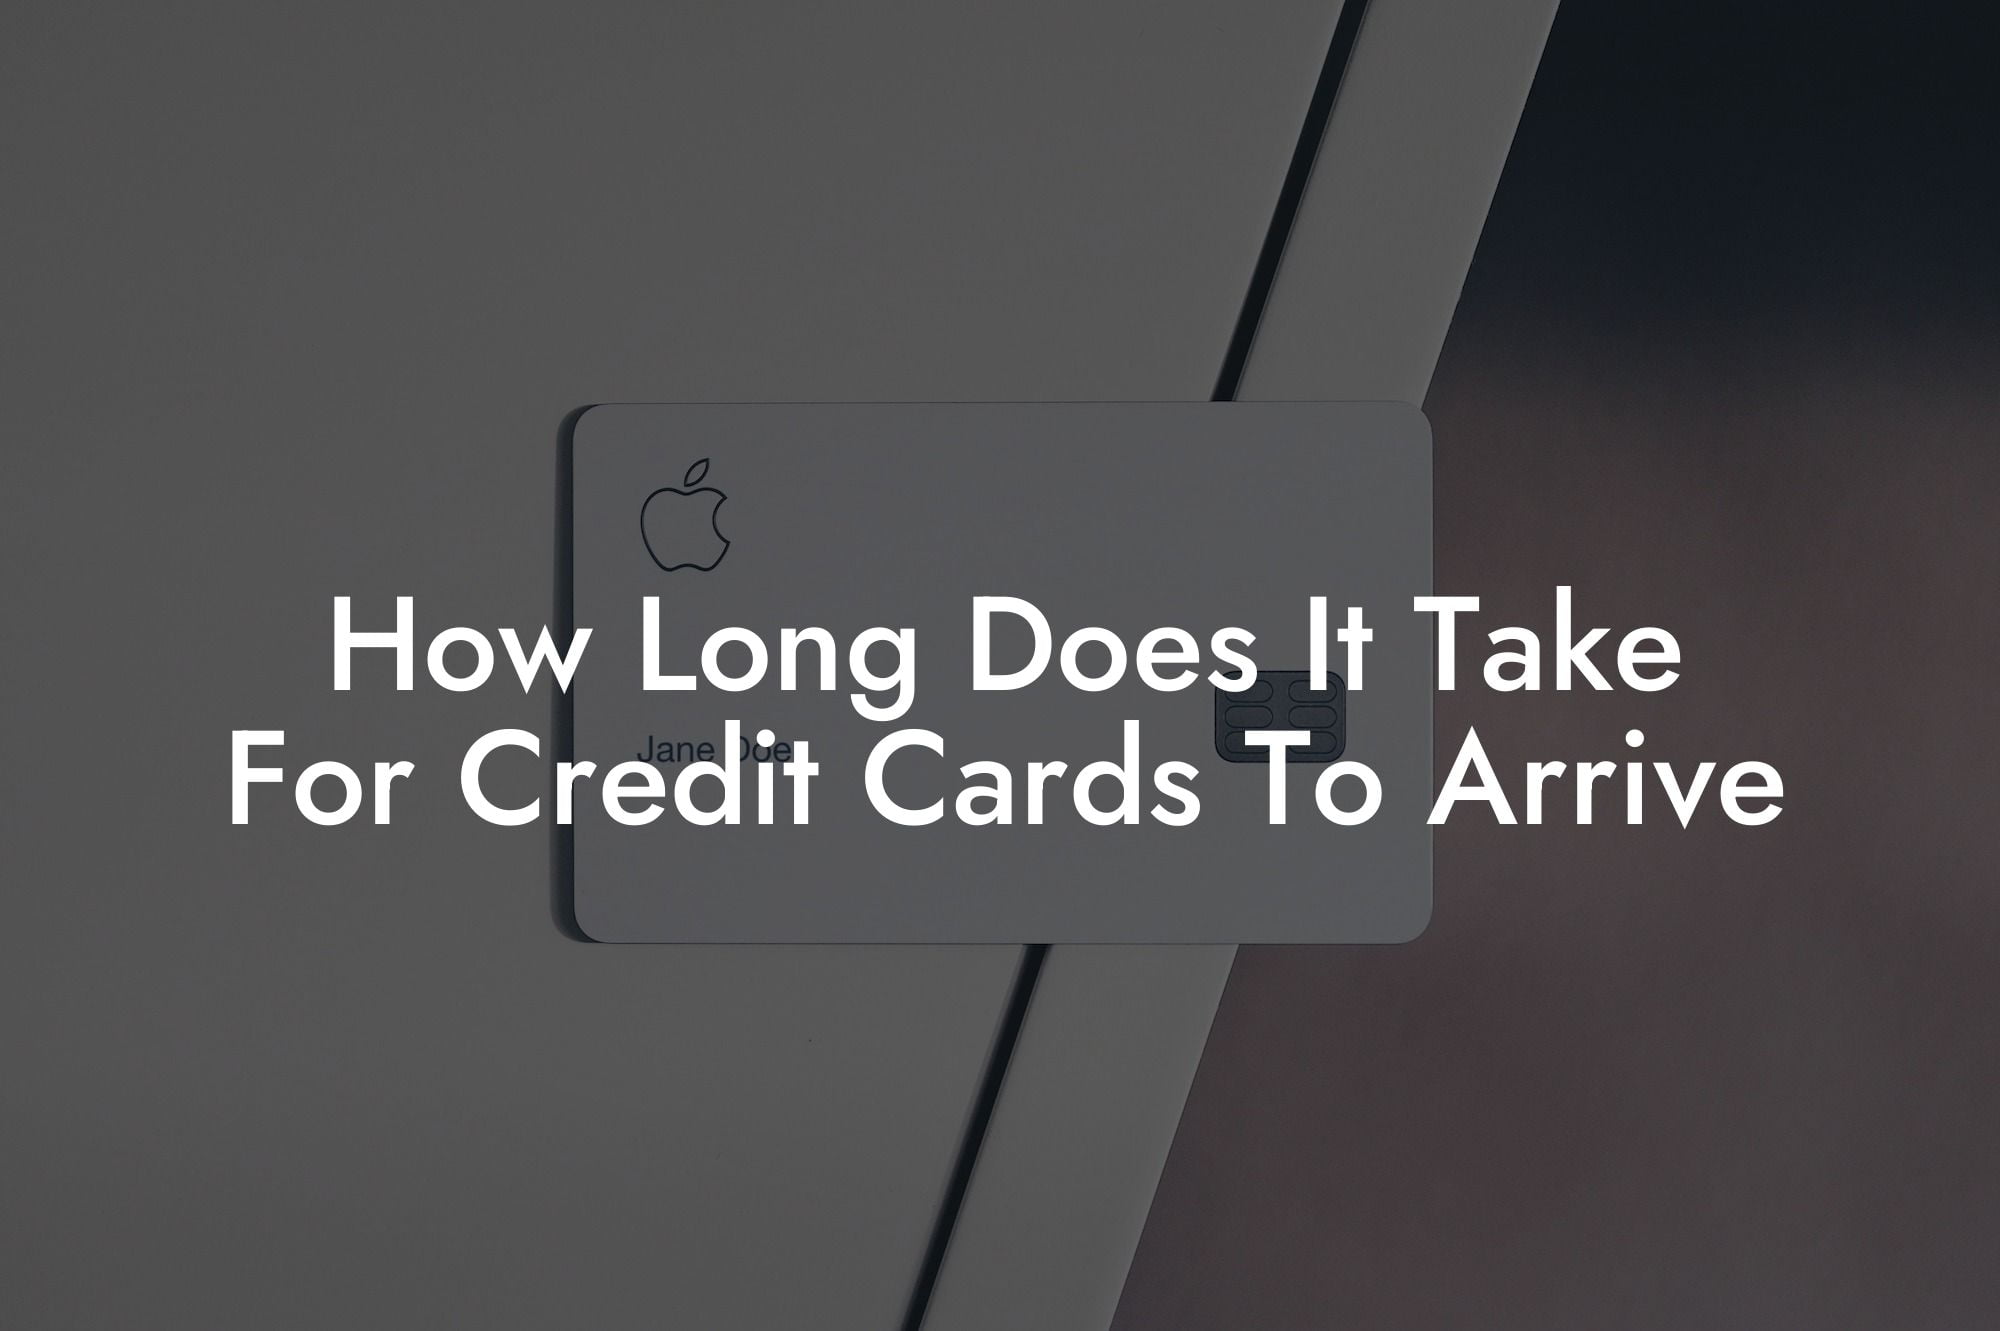 How Long Does It Take For Credit Cards To Arrive